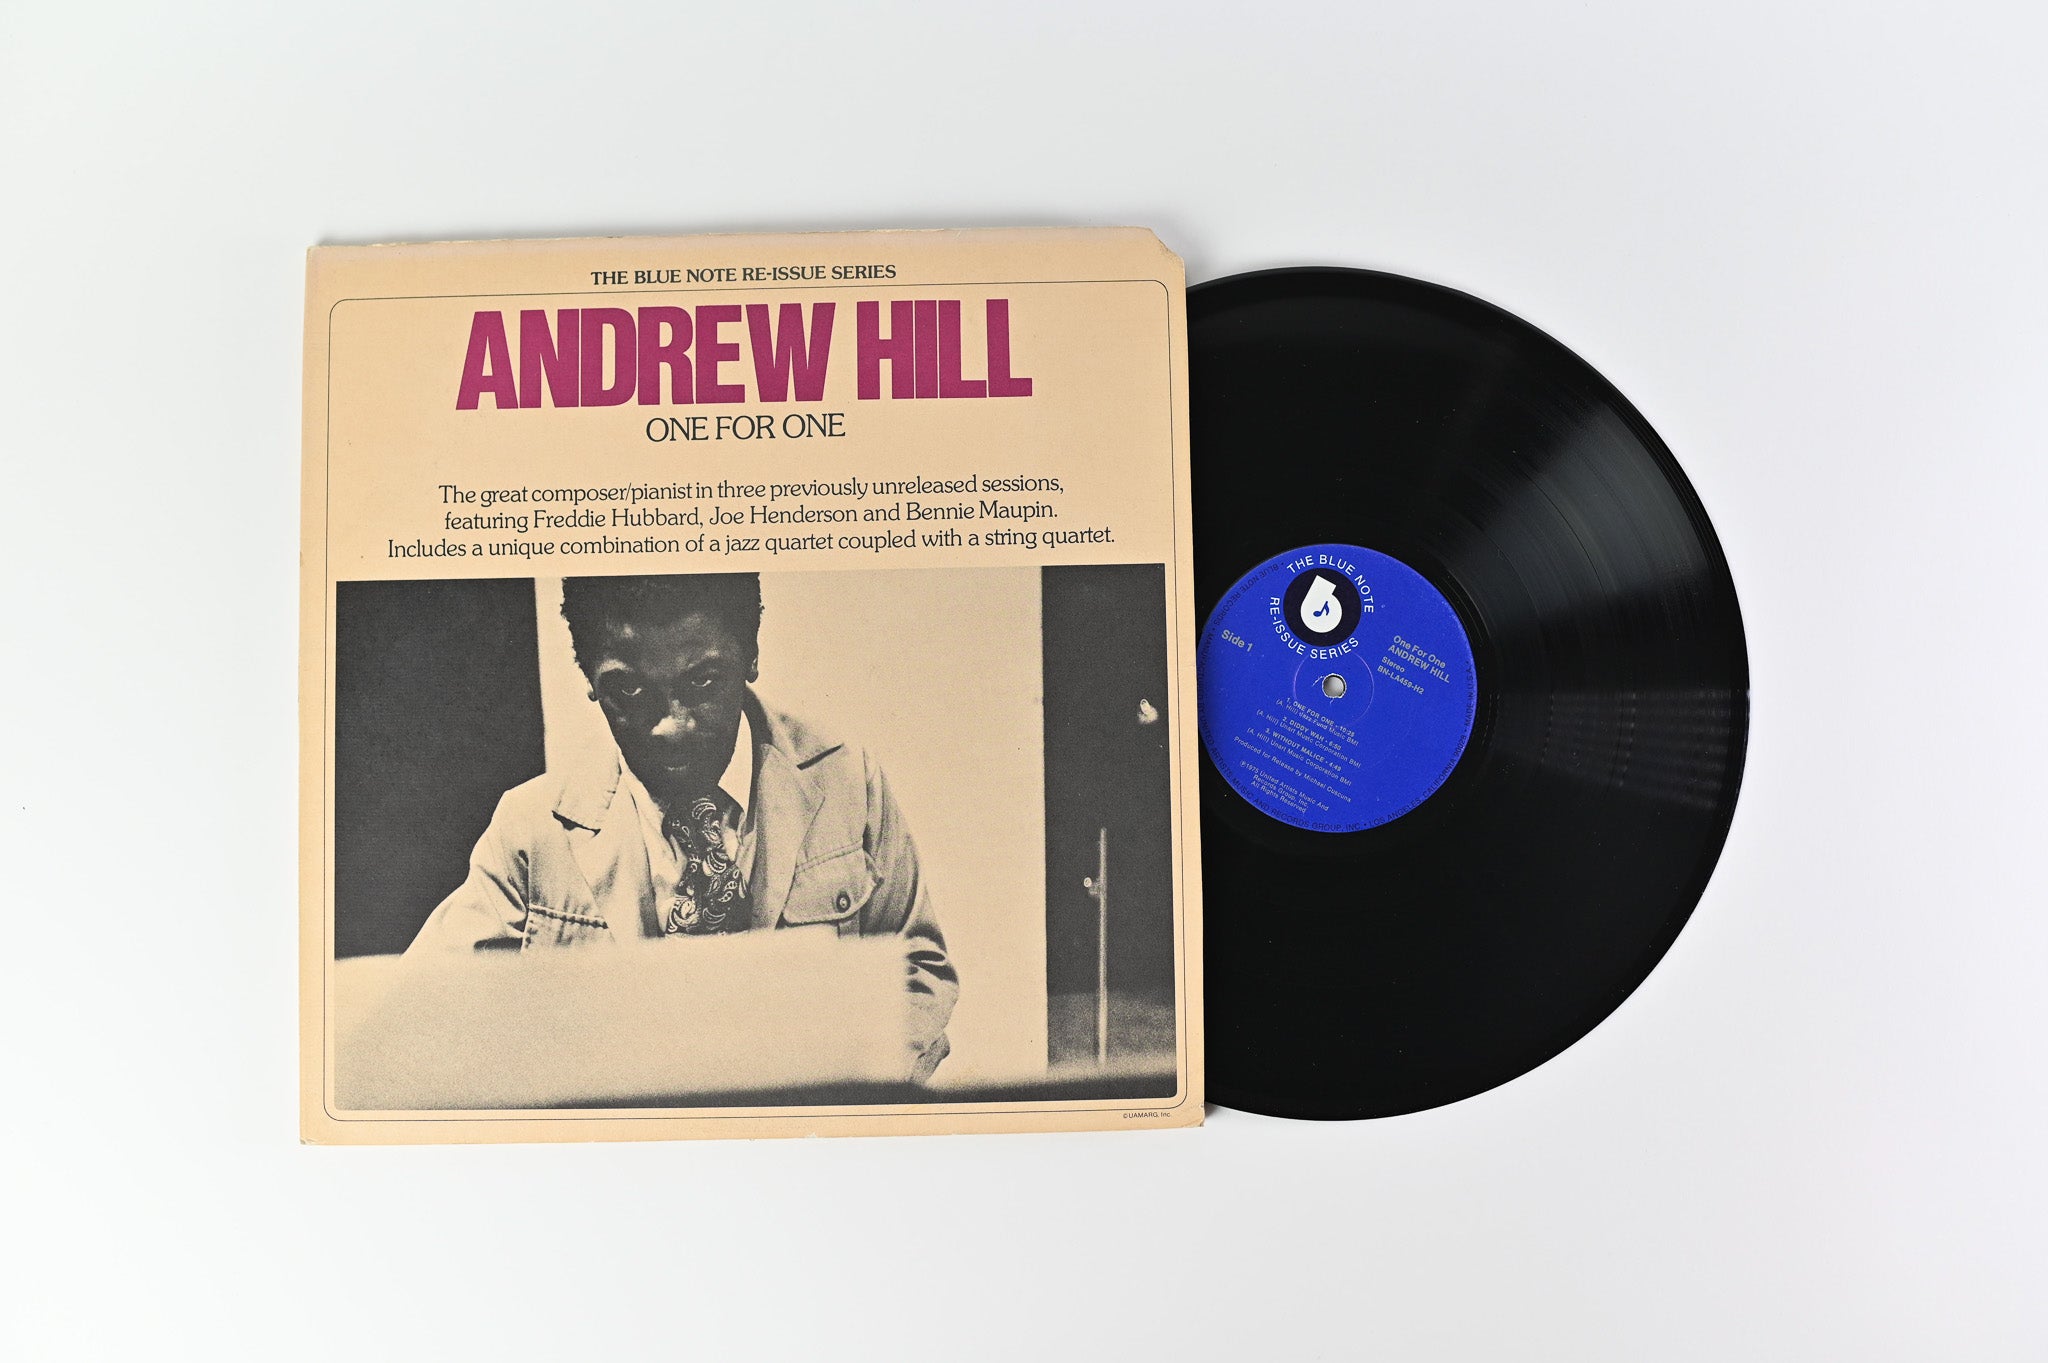 Andrew Hill - One For One on Blue Note